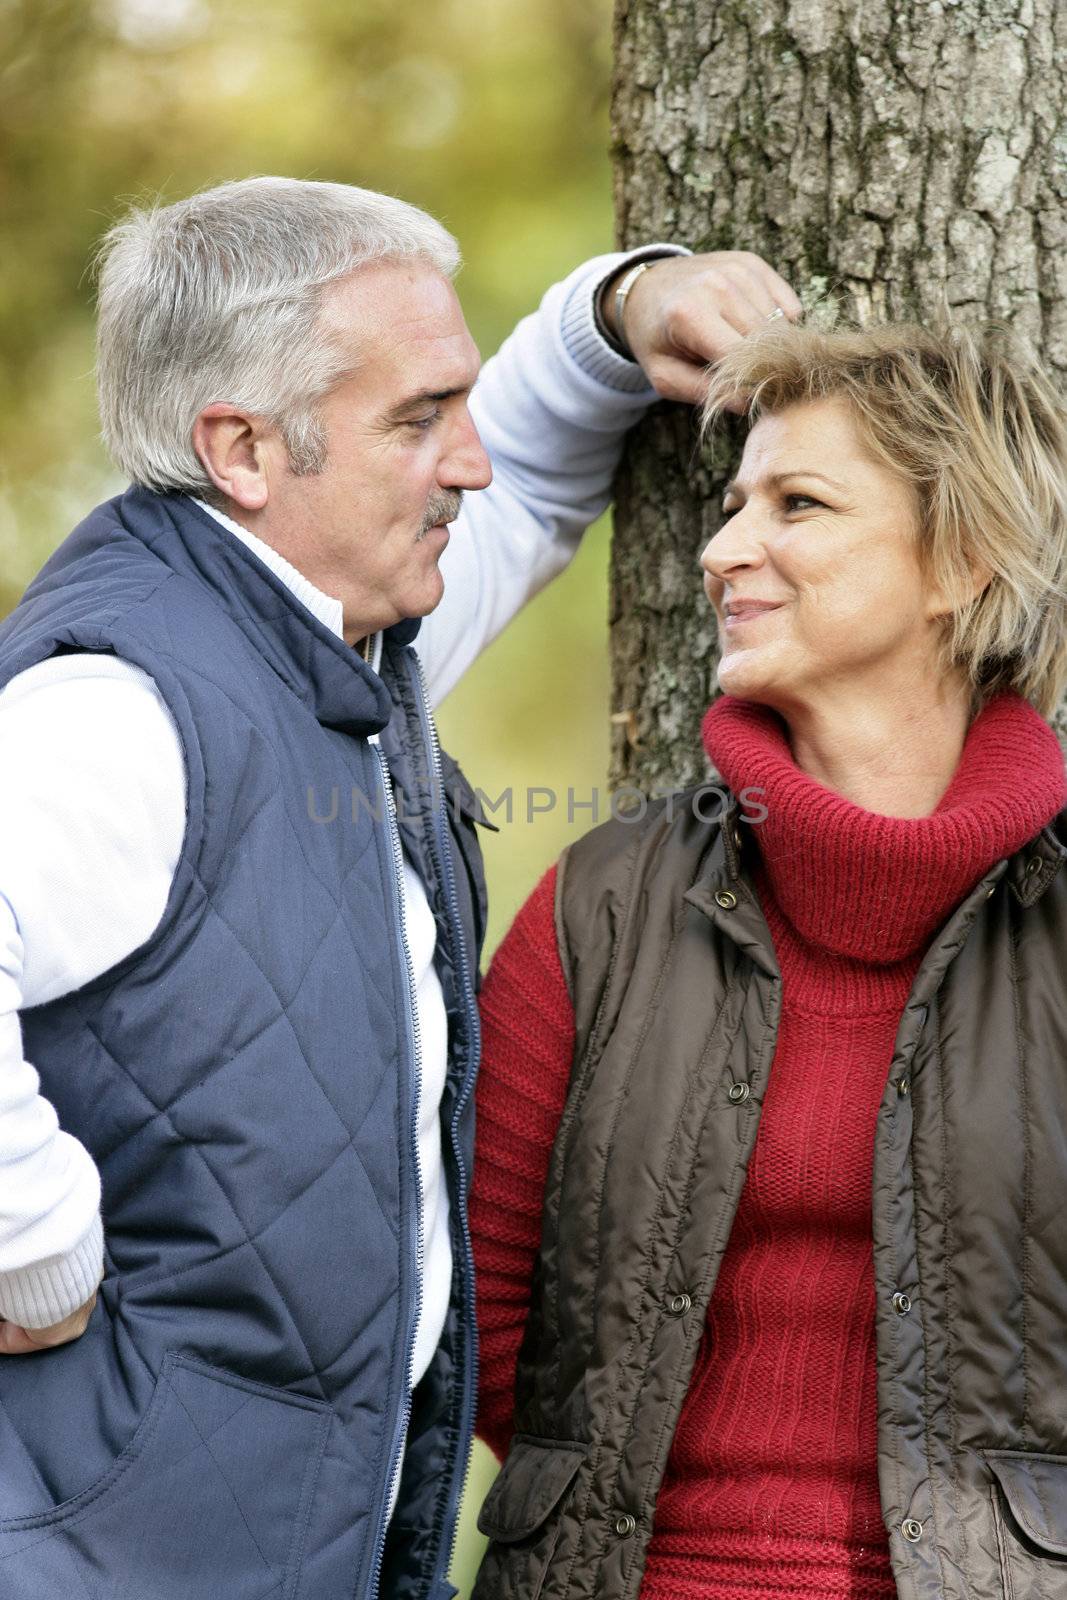 Loving couple standing by a tree